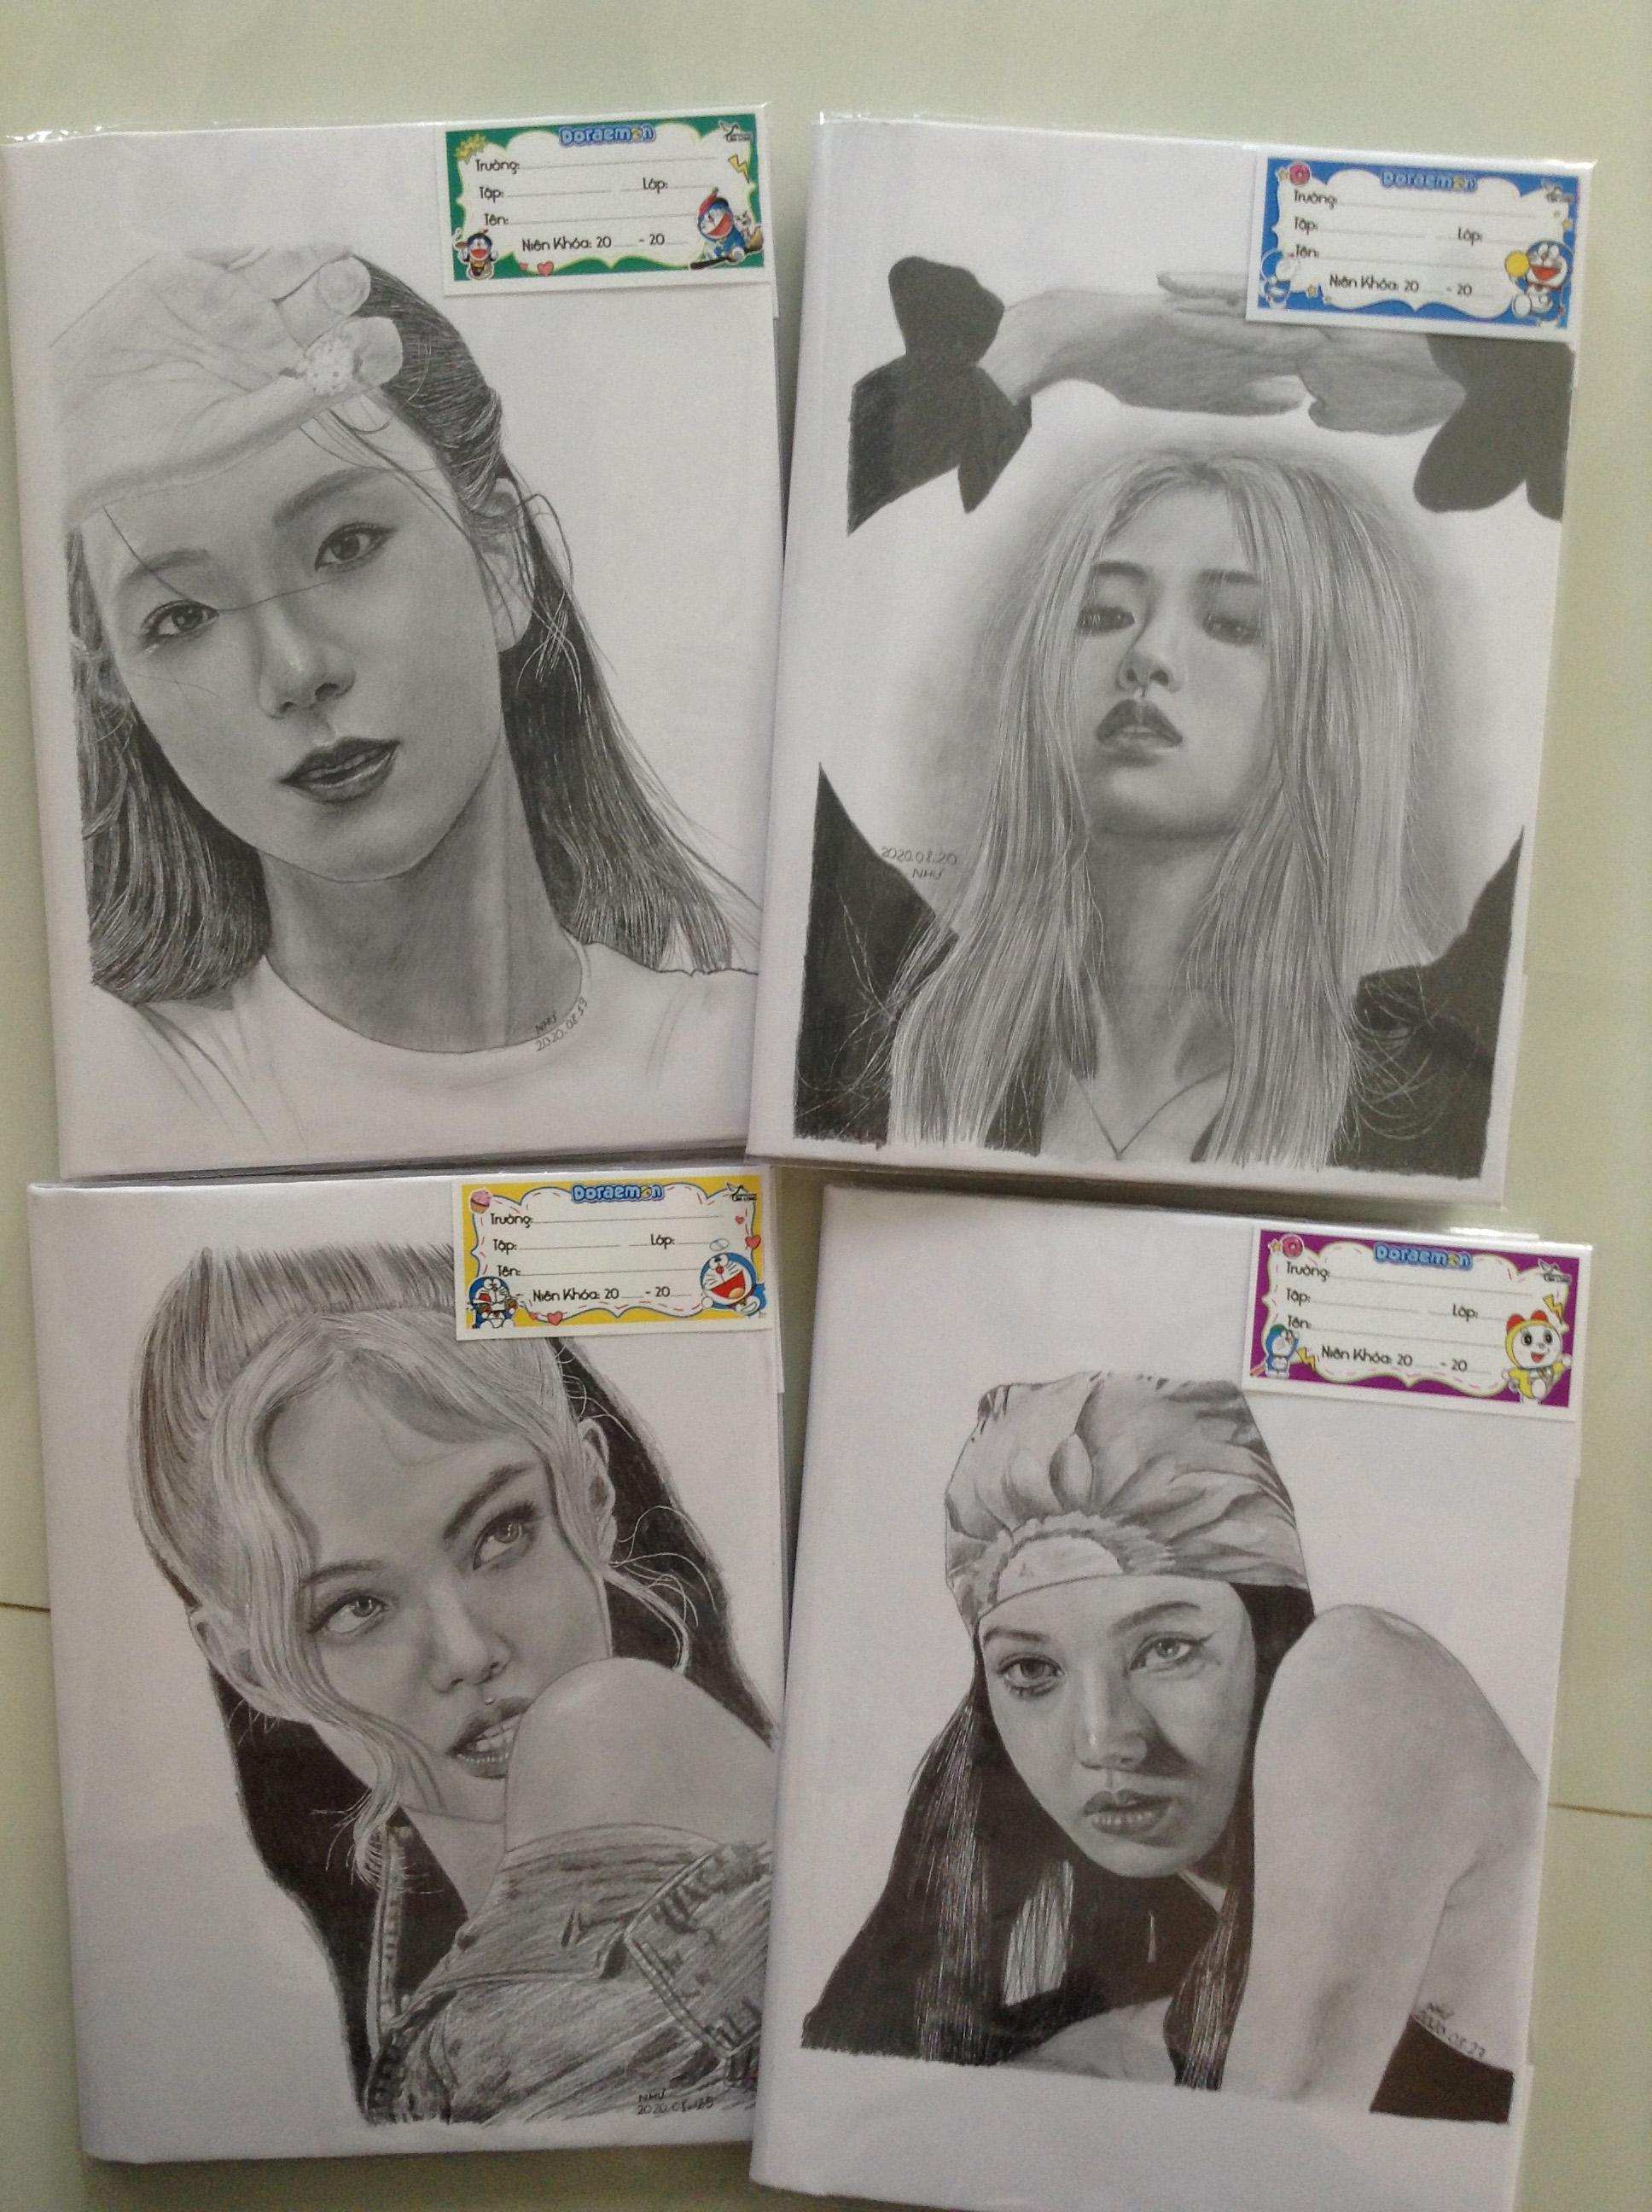 Get ready to be blown away by these breathtaking Blackpink drawings. Each image captures the essence of the group with stunning accuracy and creativity. Whether you\'re a die-hard fan or new to the K-pop scene, these drawings are sure to leave you mesmerized and wanting more.